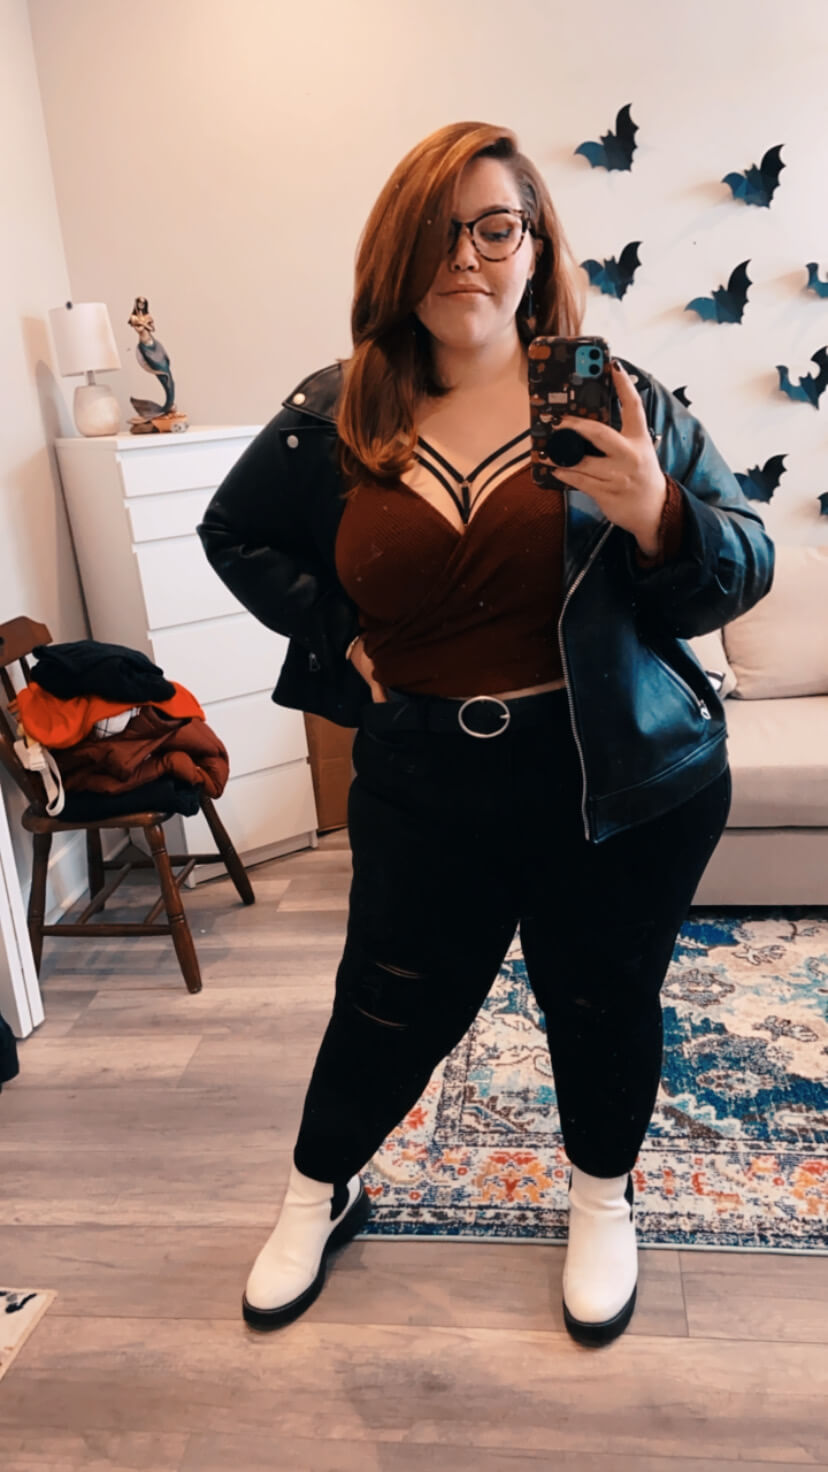 What are the best plus-size fashion sites for curvy girls to shop